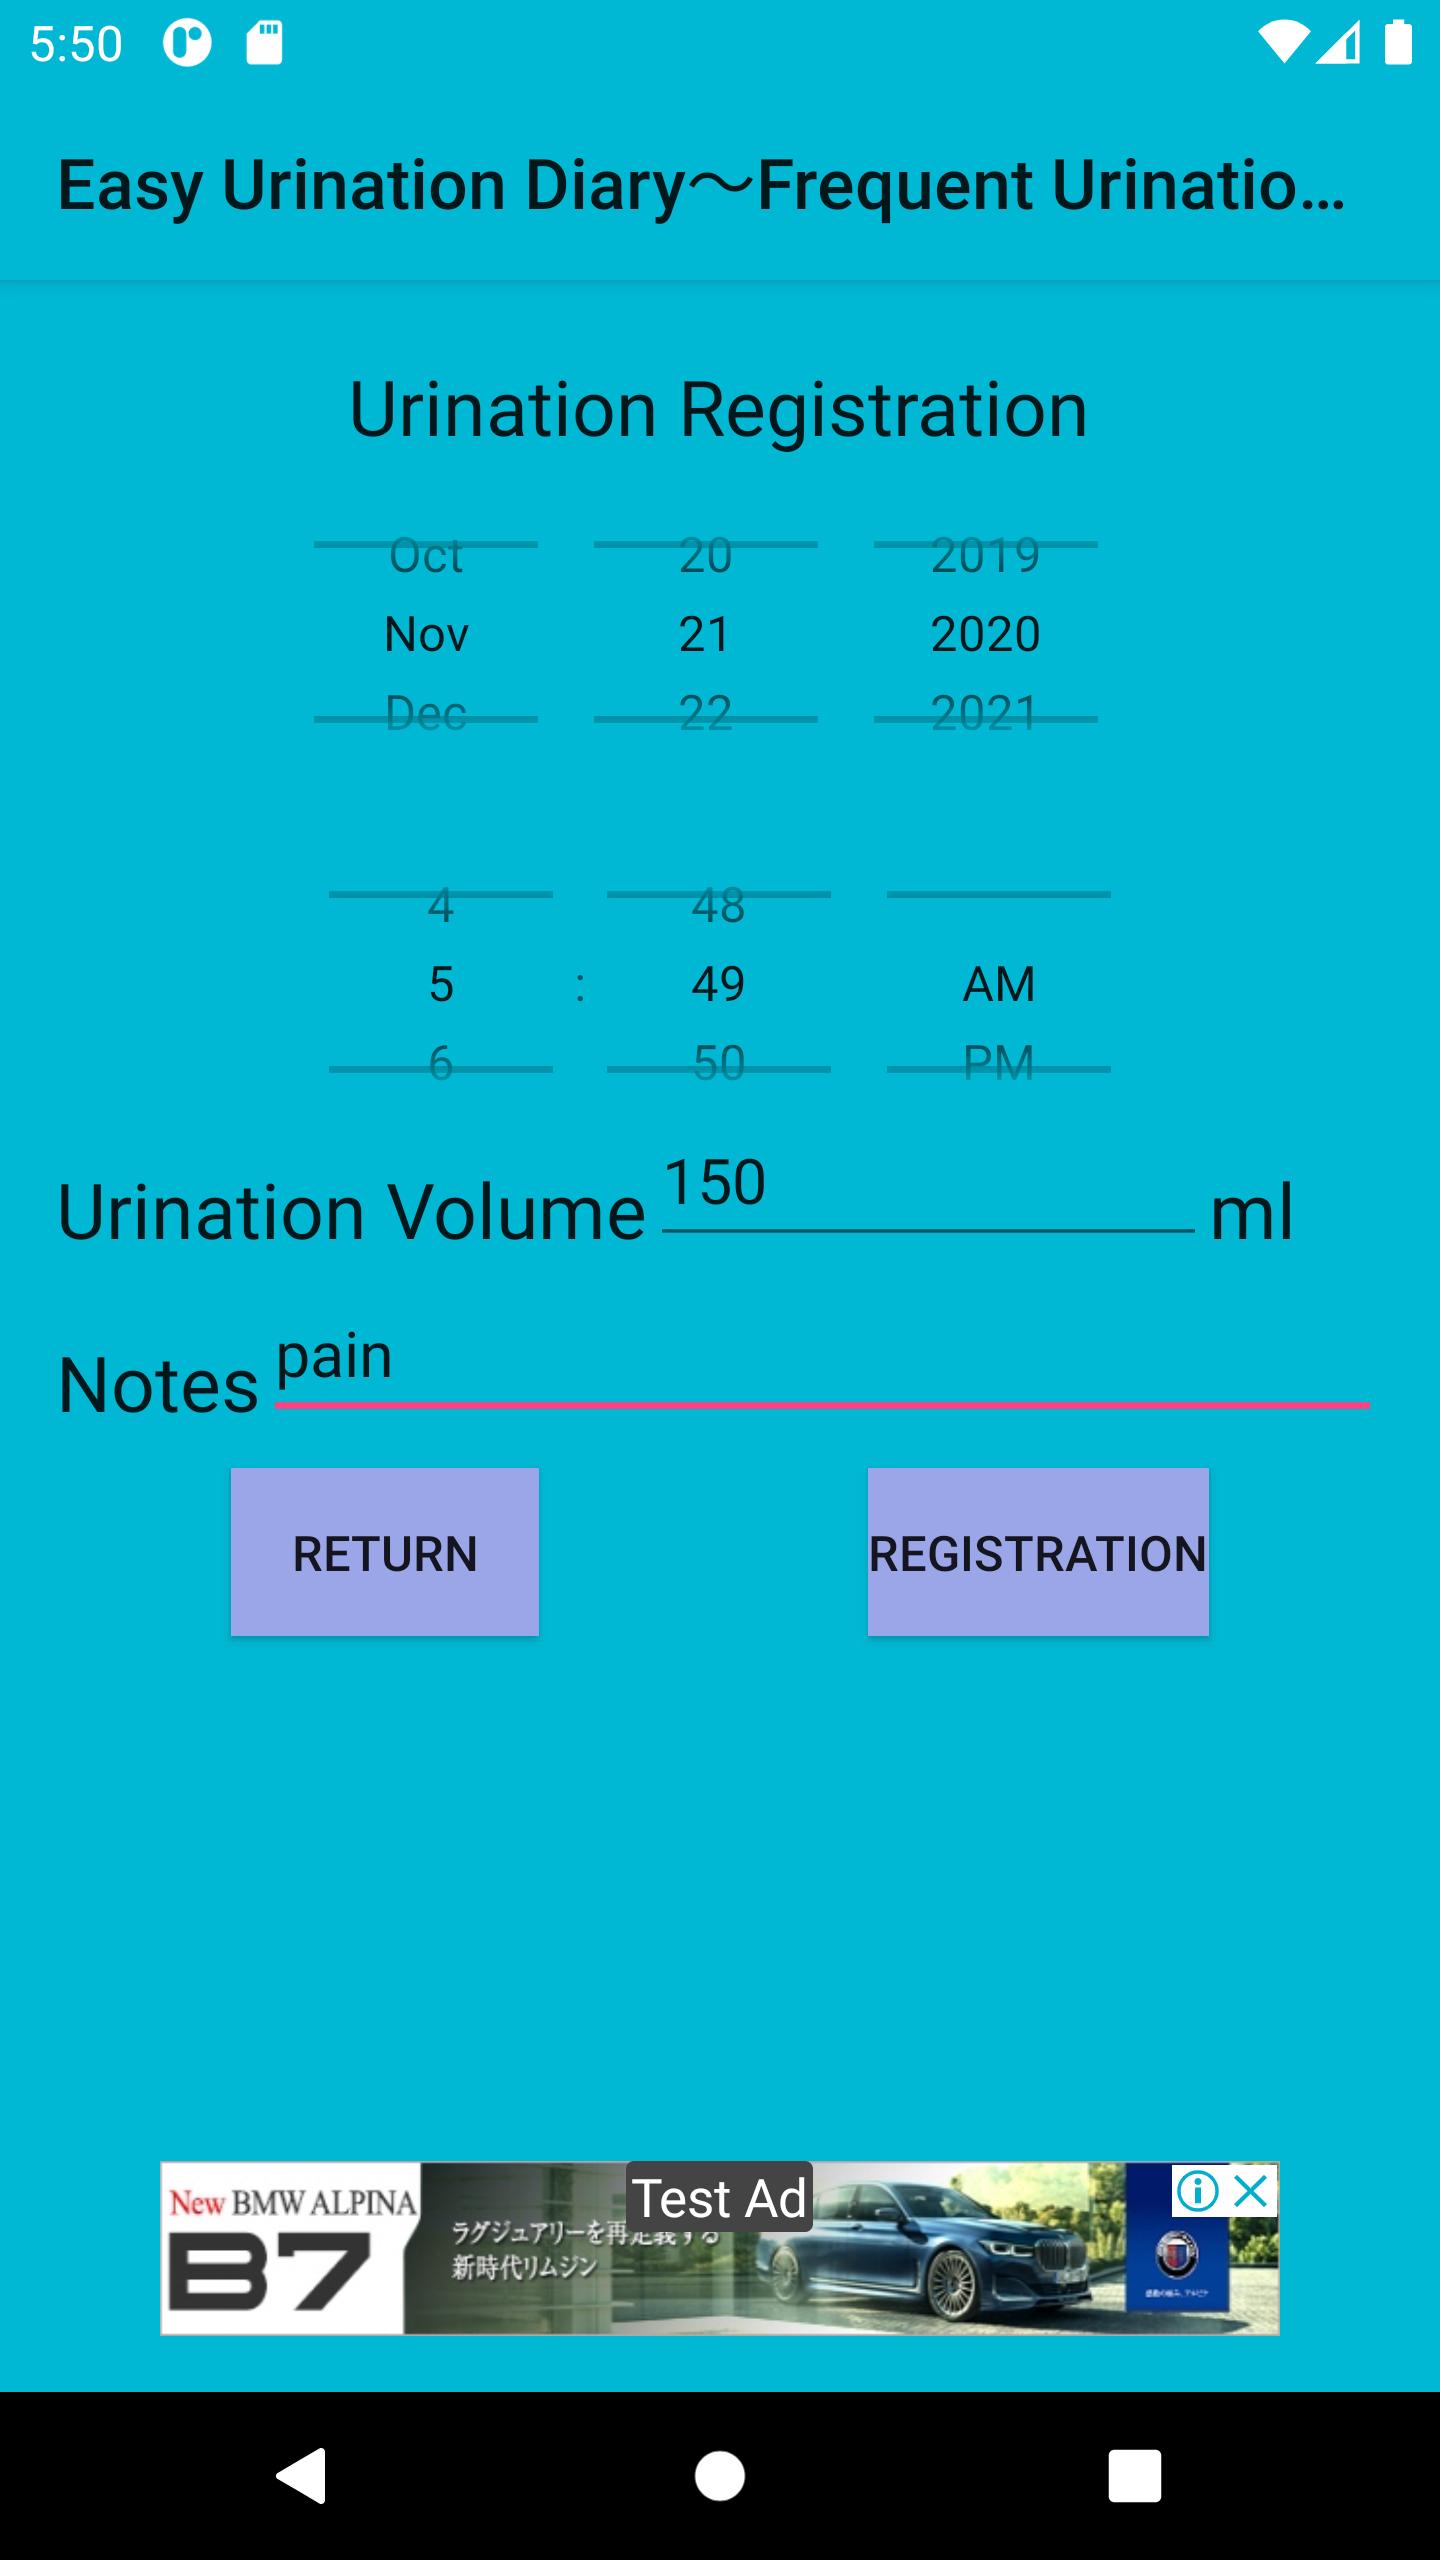 Easy Urination Diary～Frequent Urination～ 7.0 Screenshot 4